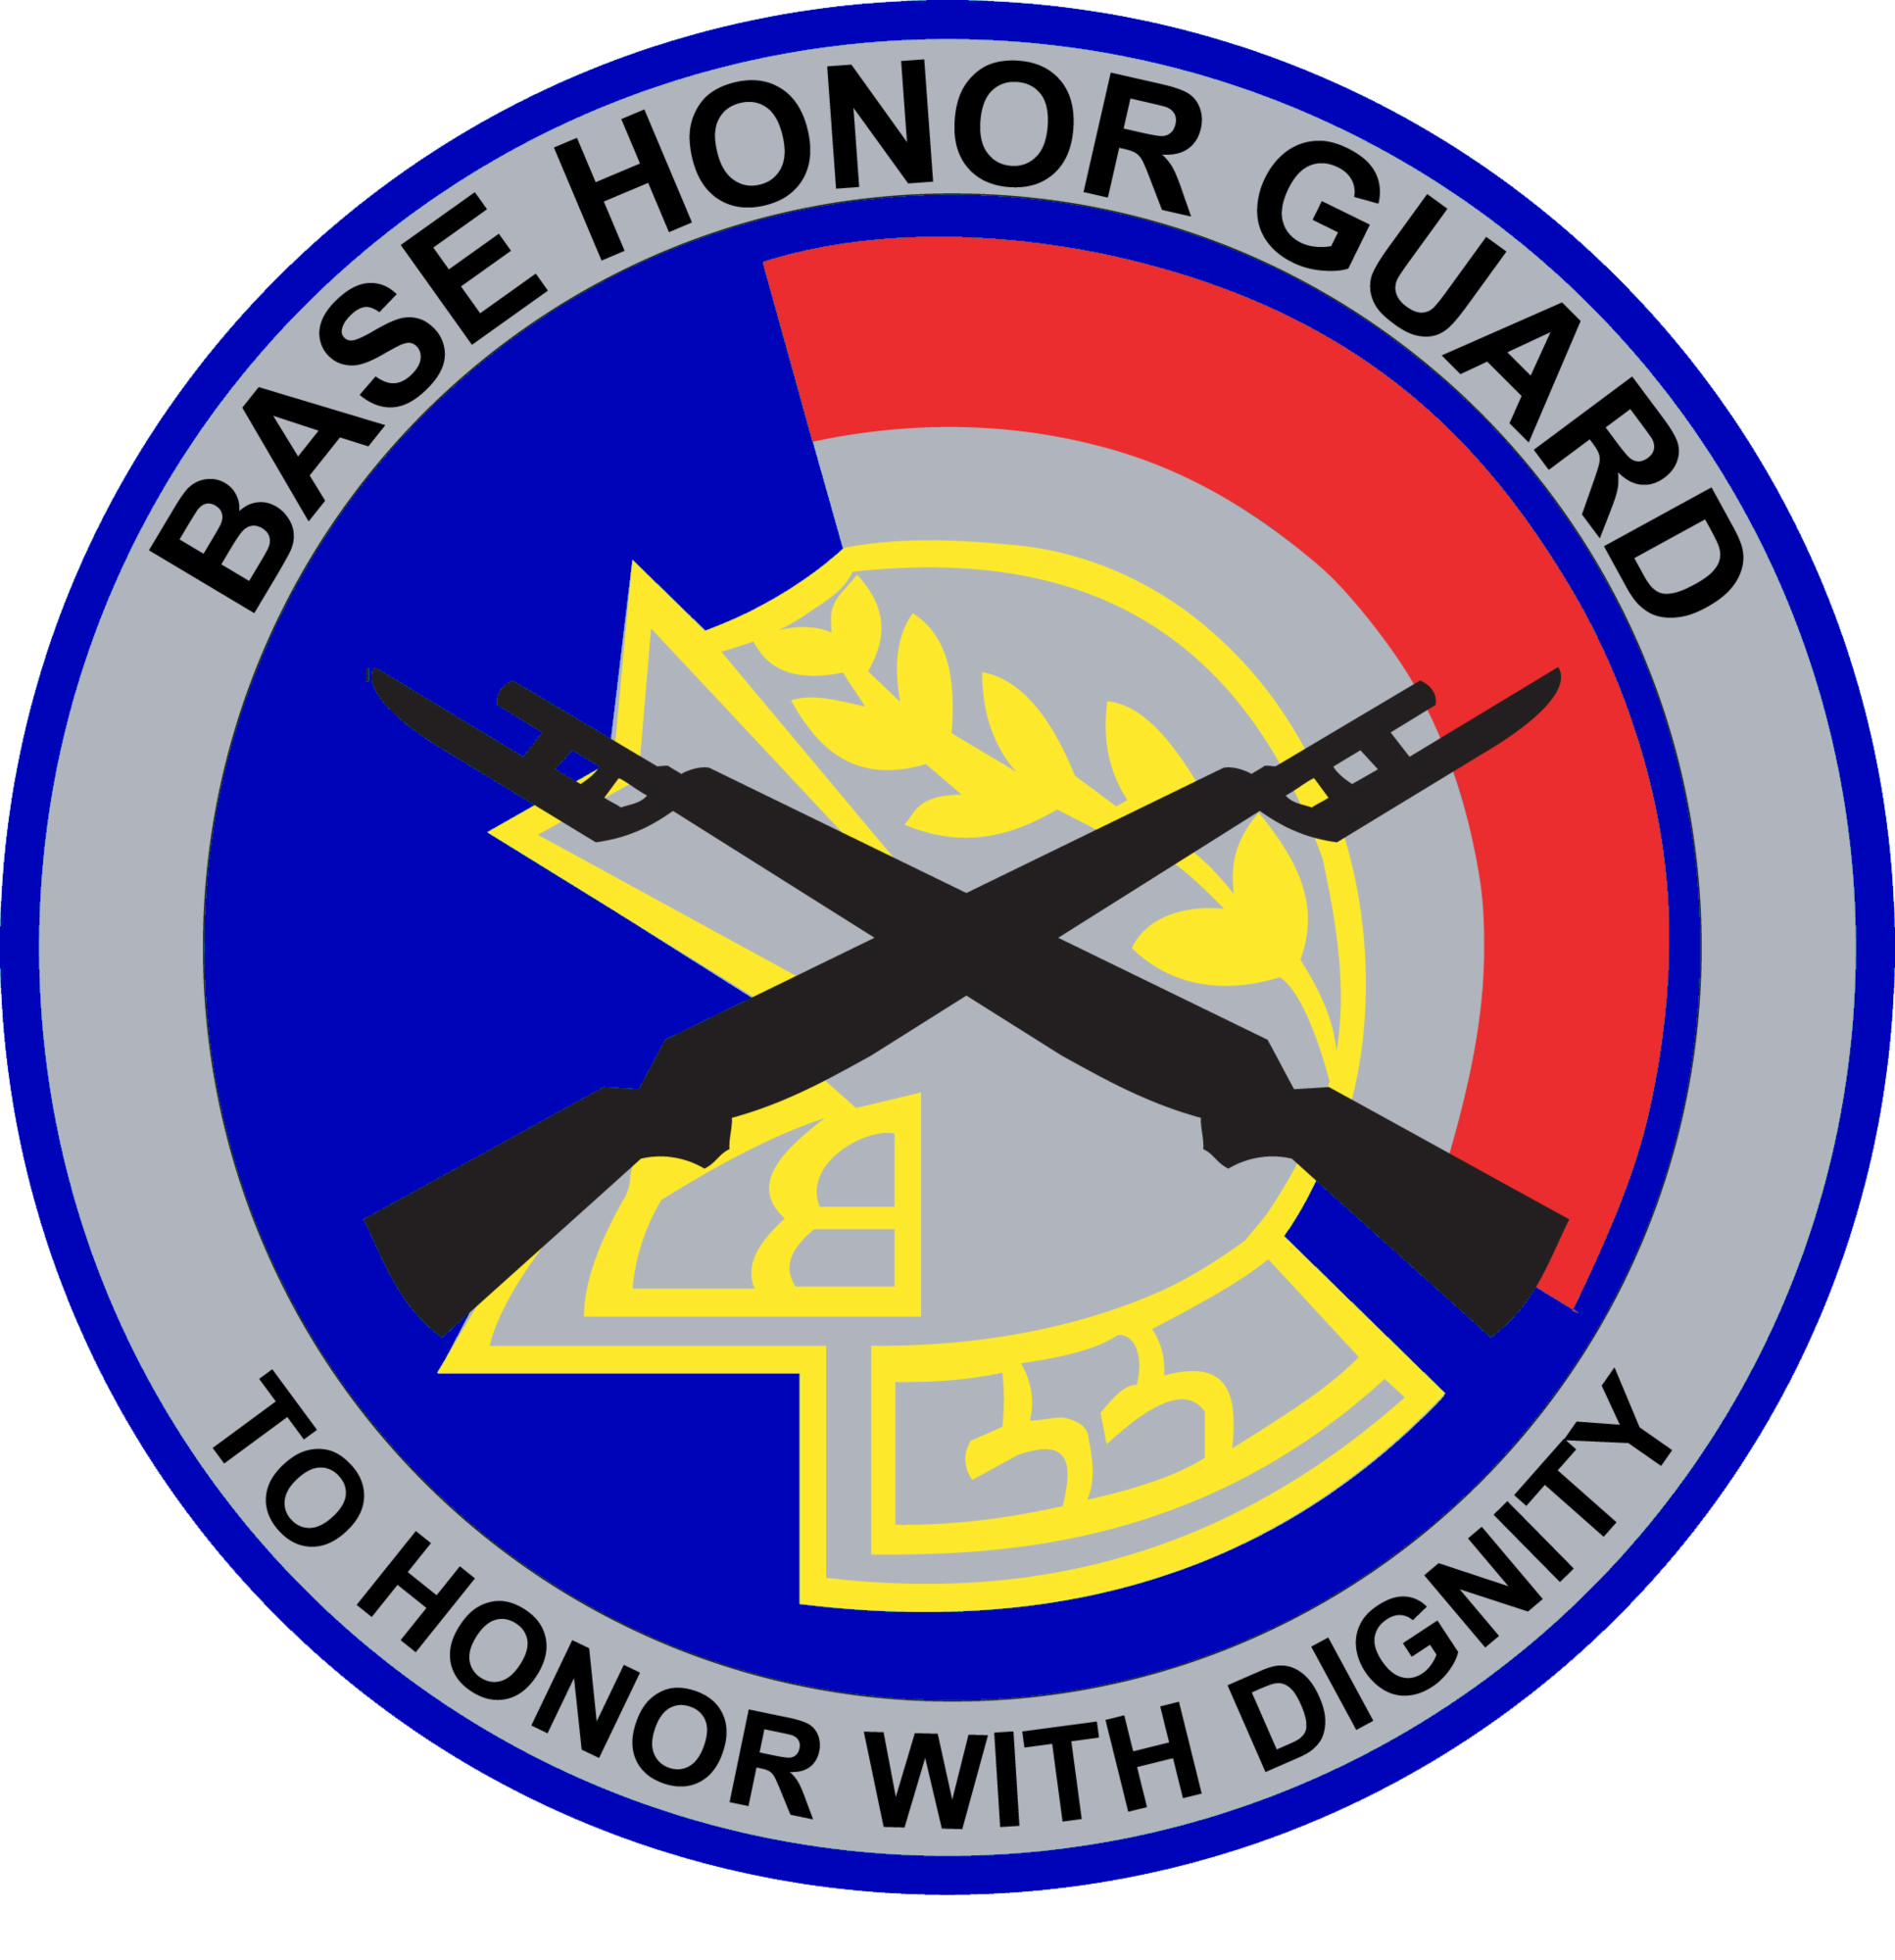 117 Base Honor Guard patch